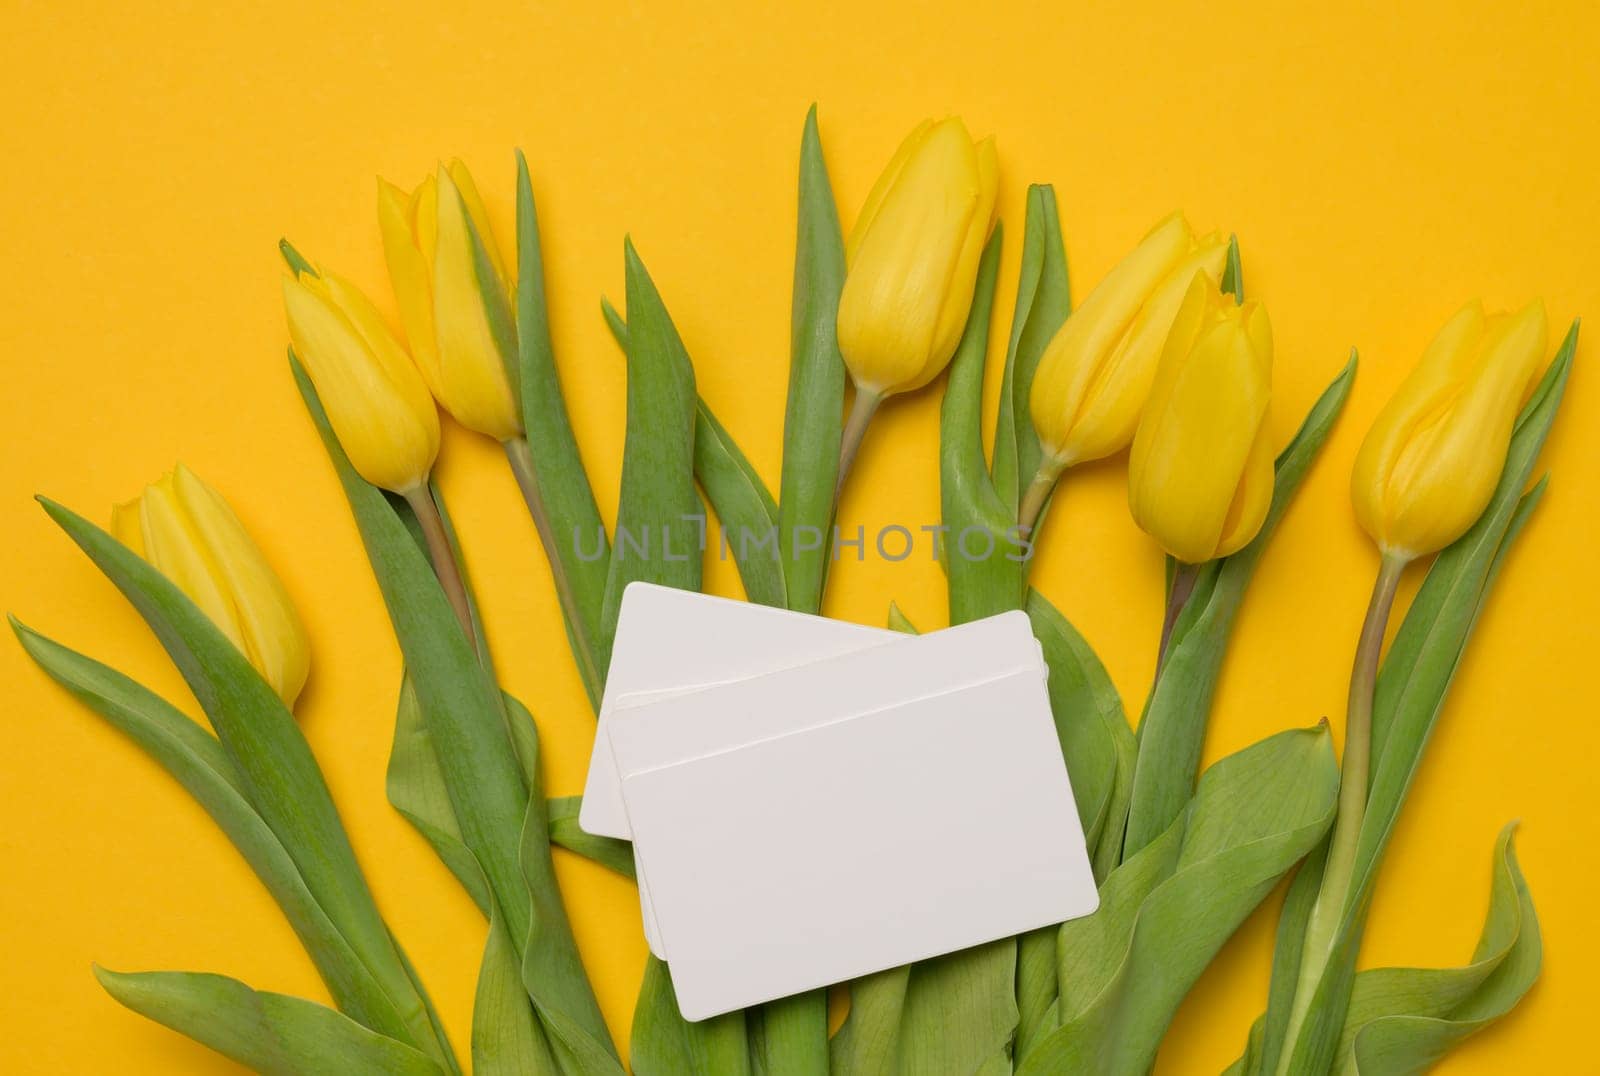 Bouquet of blooming yellow tulips with green leaves on a yellow background by ndanko